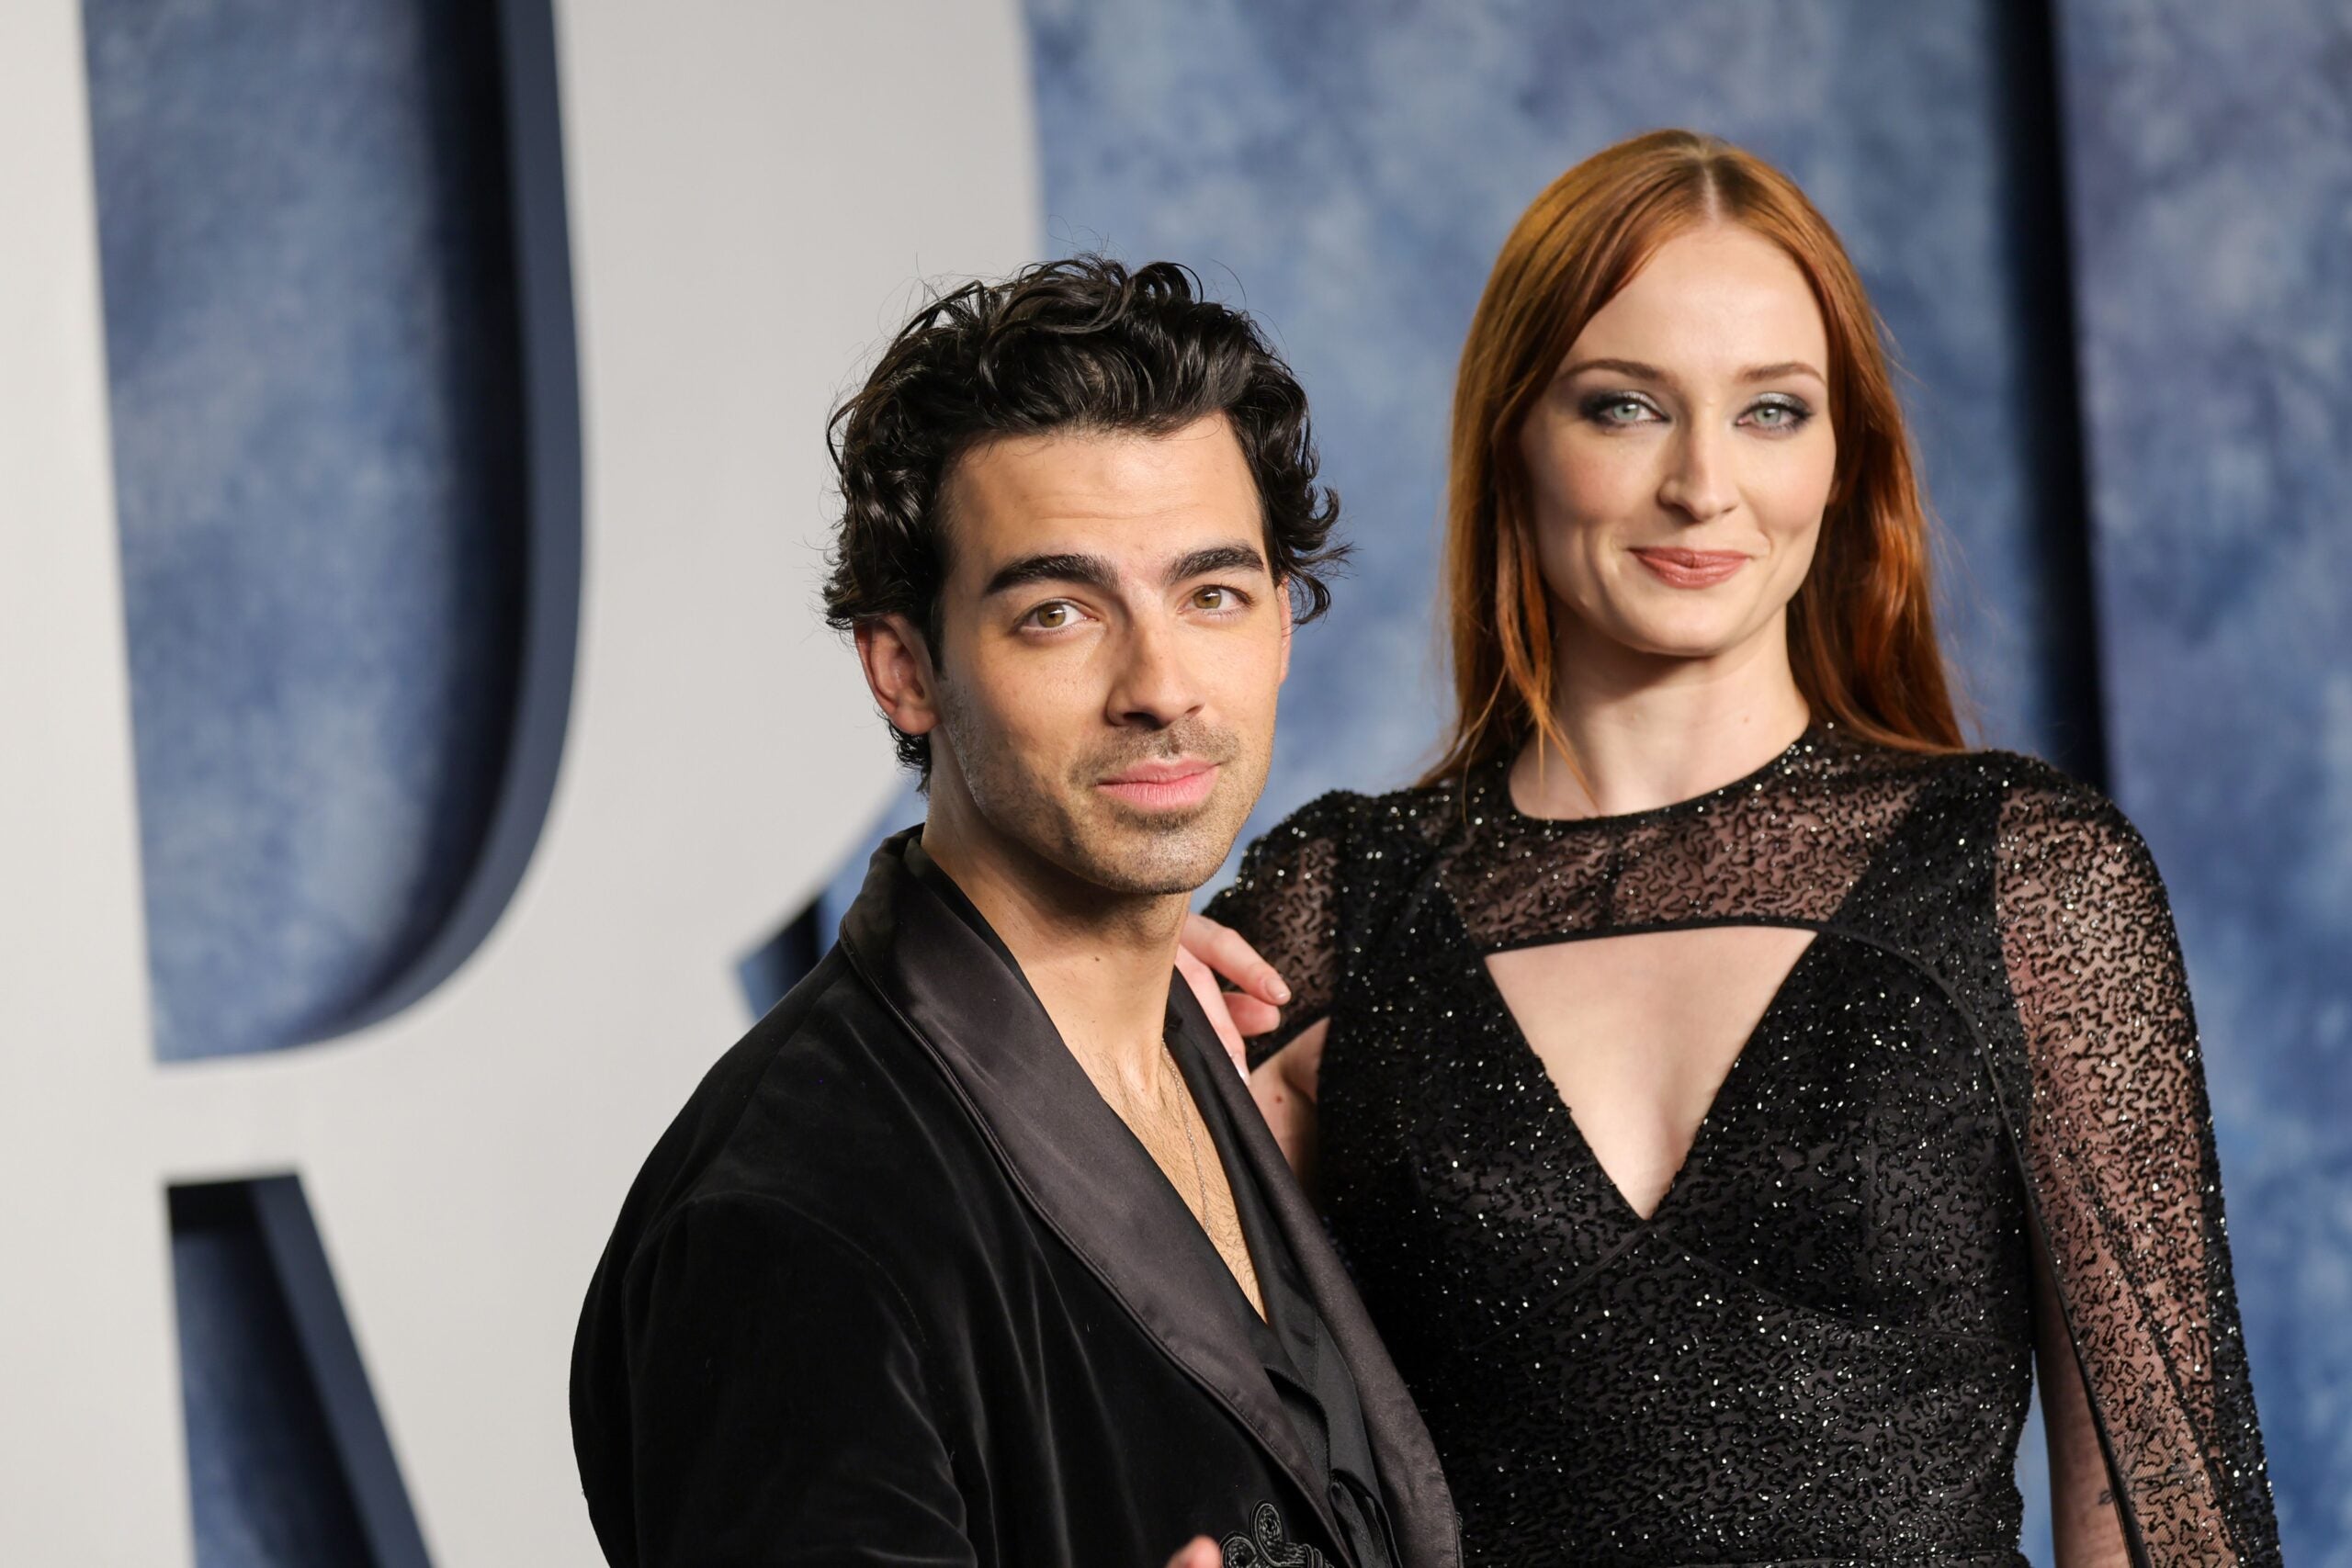 Joe Jonas and Sophie Turner attend the 2023 Vanity Fair Oscar Party on March 12, 2023, in Beverly Hills, California.